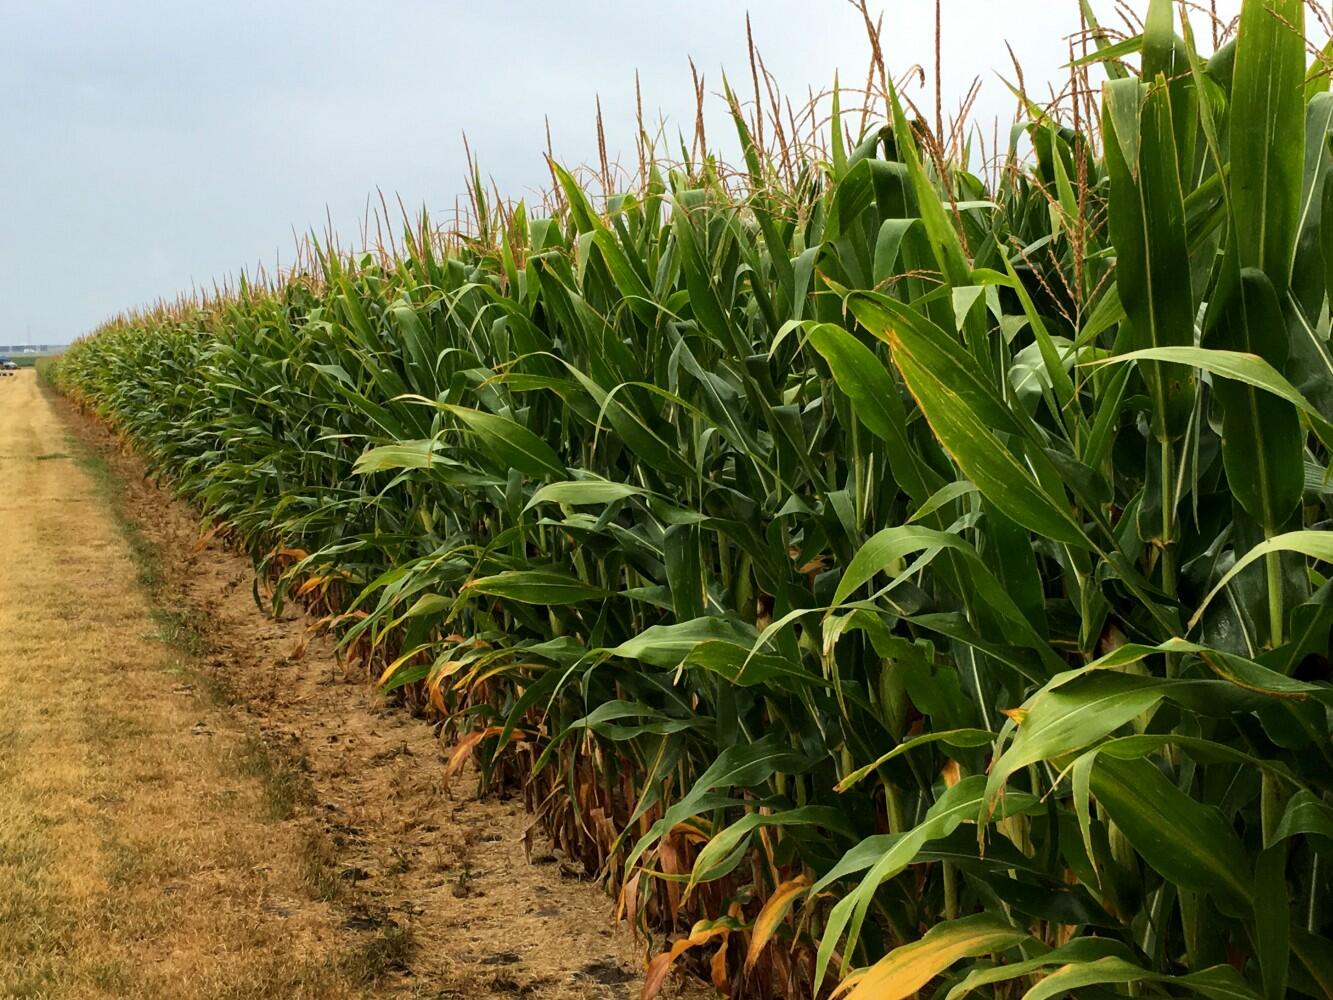 20 years in the making: Rotate corn for better soil health